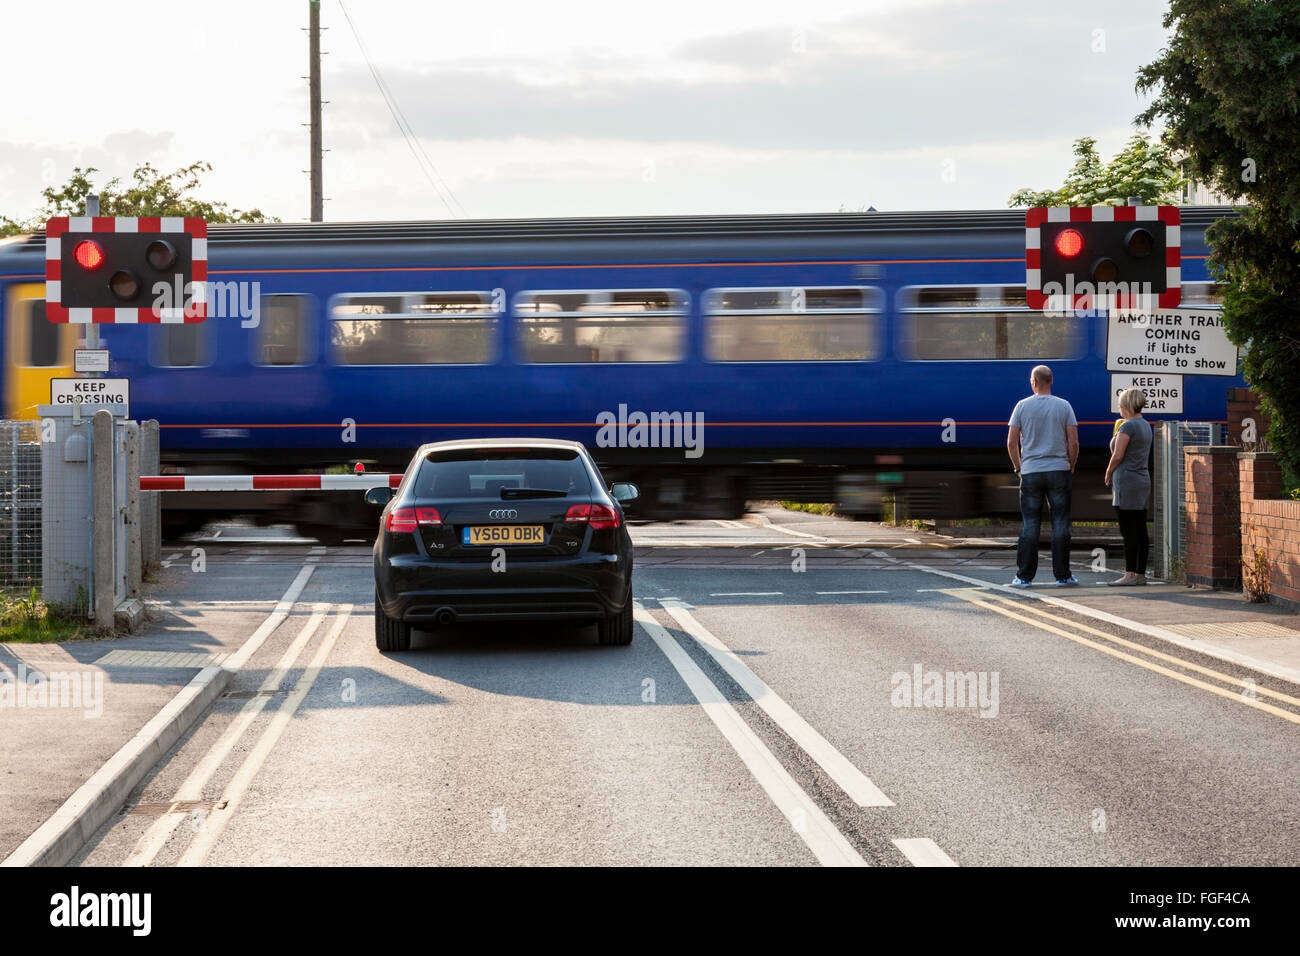 A car and people waiting at a railway level crossing as a train passes, Attenborough, Nottinghamshire, England, UK Stock Photo